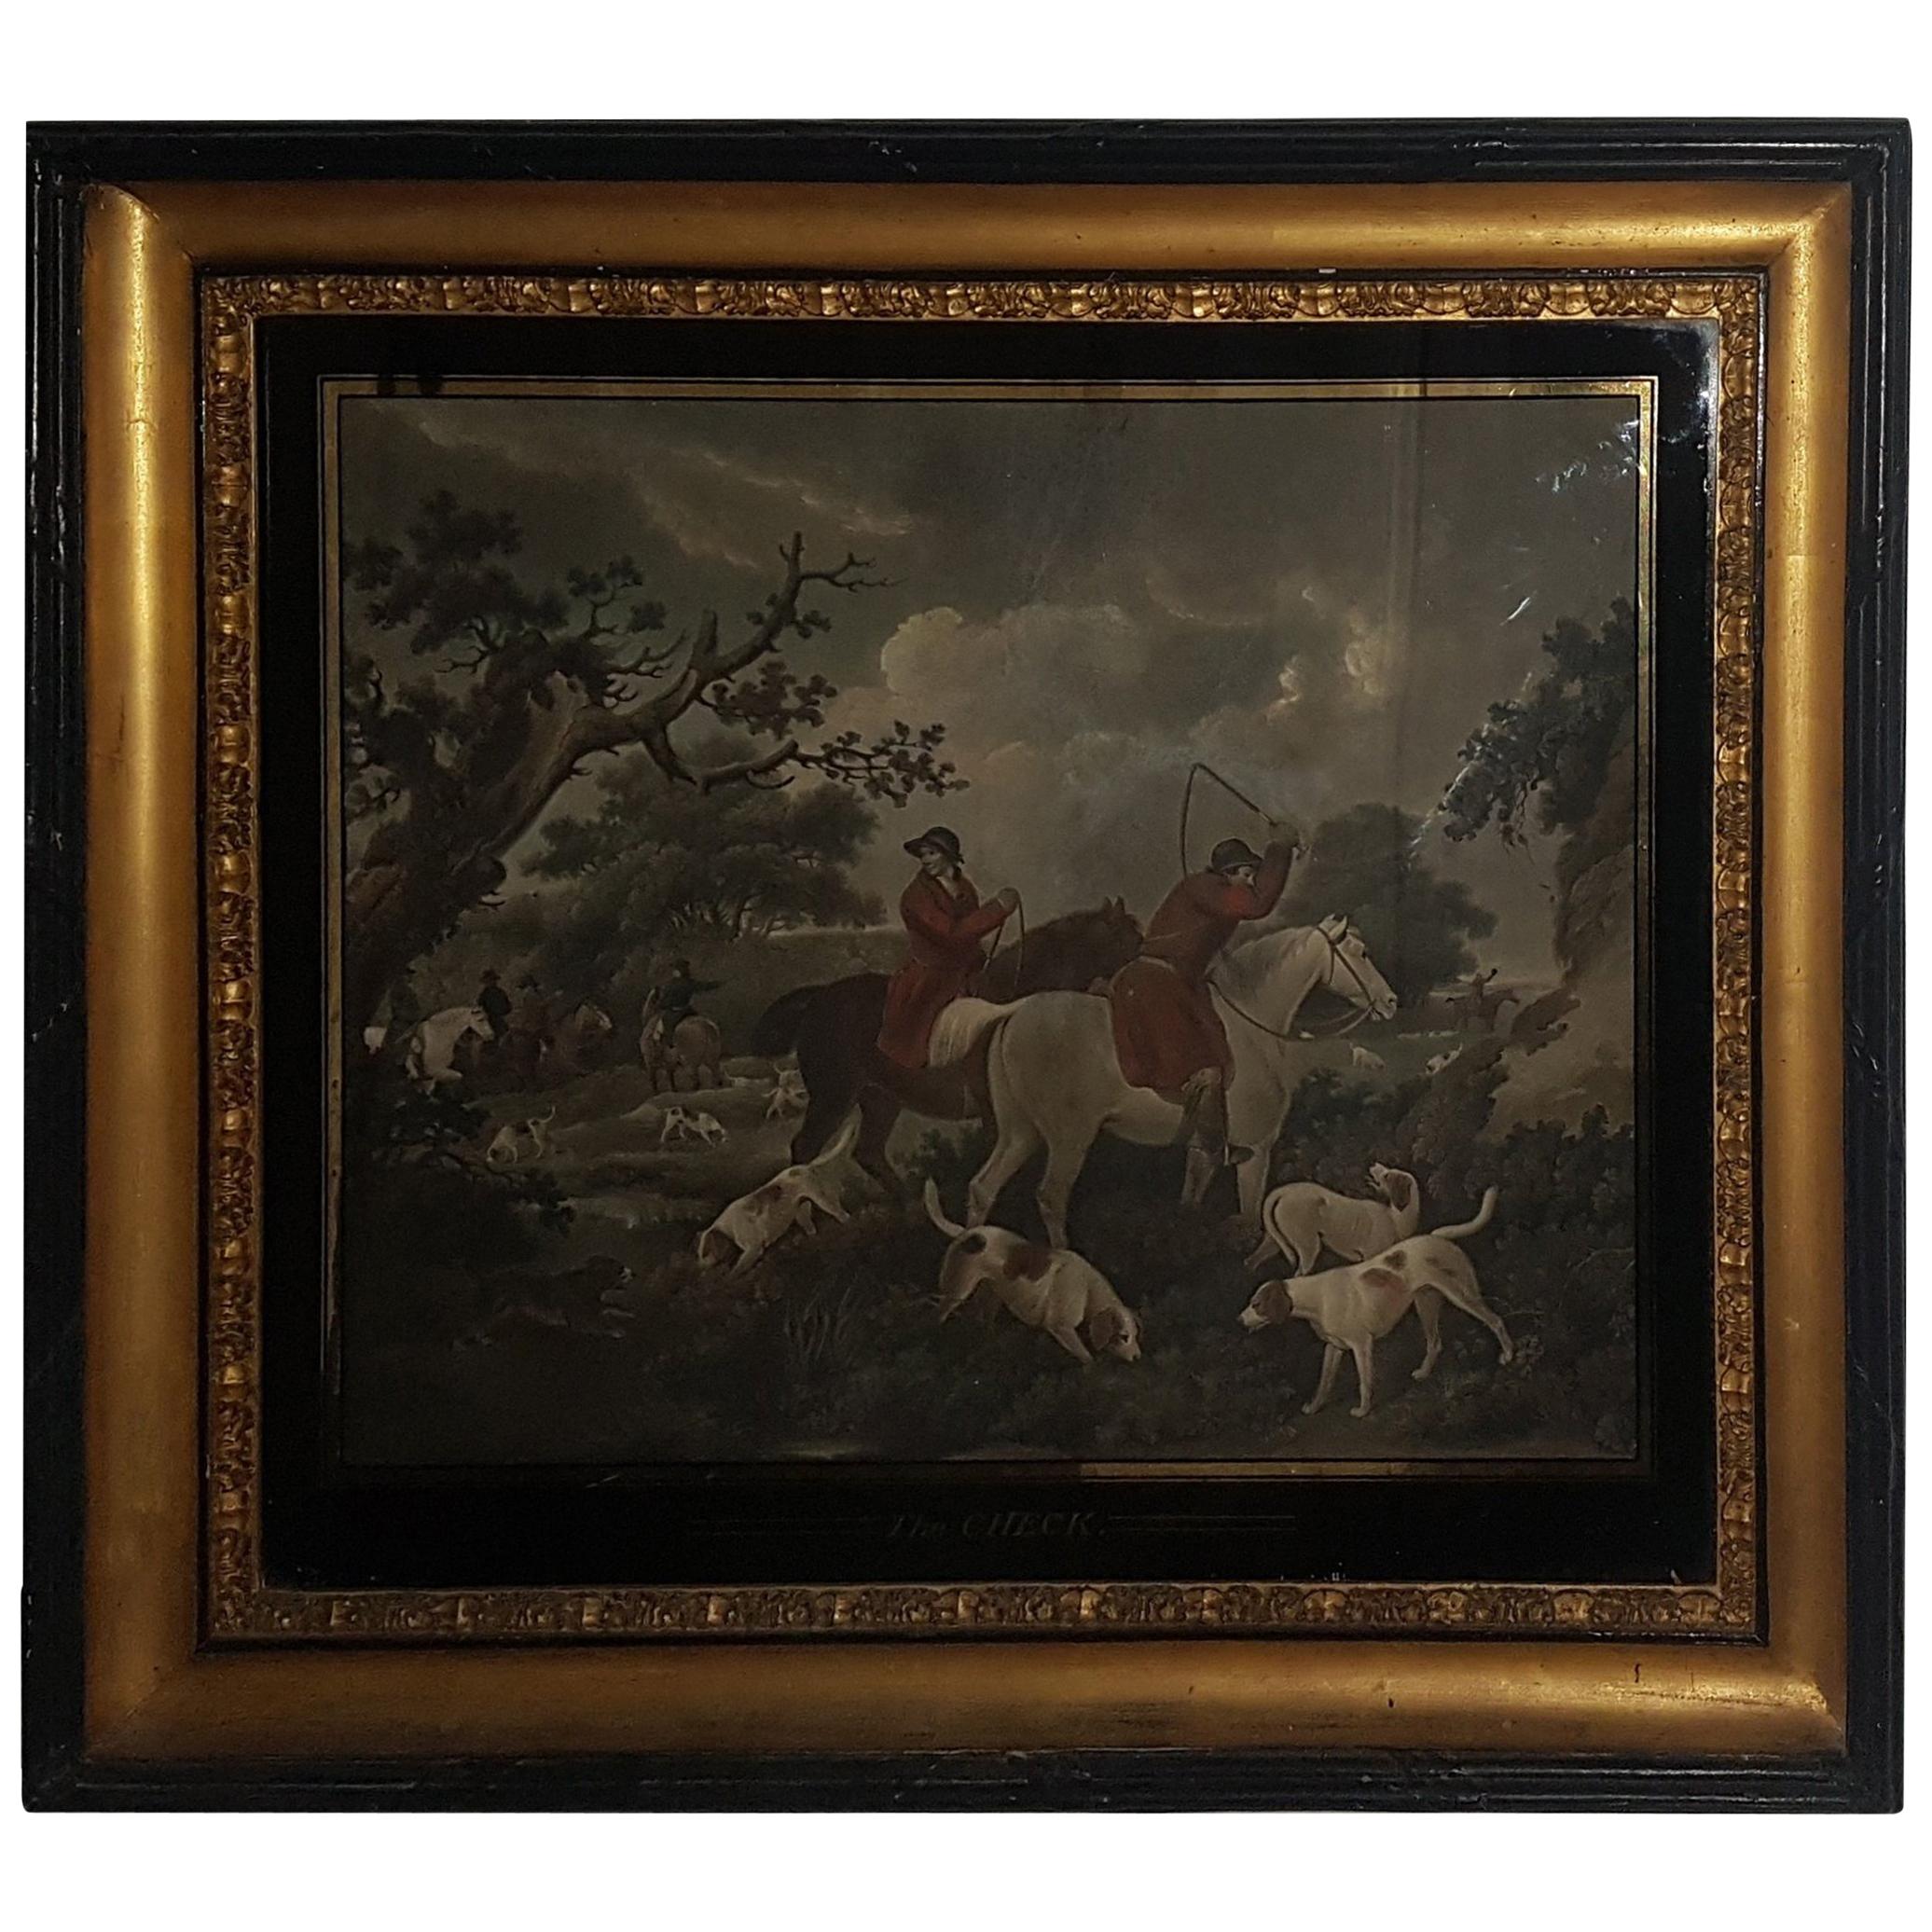 Early 19th Century English School Hunting Scenes in Eglomise and Gilt Frames